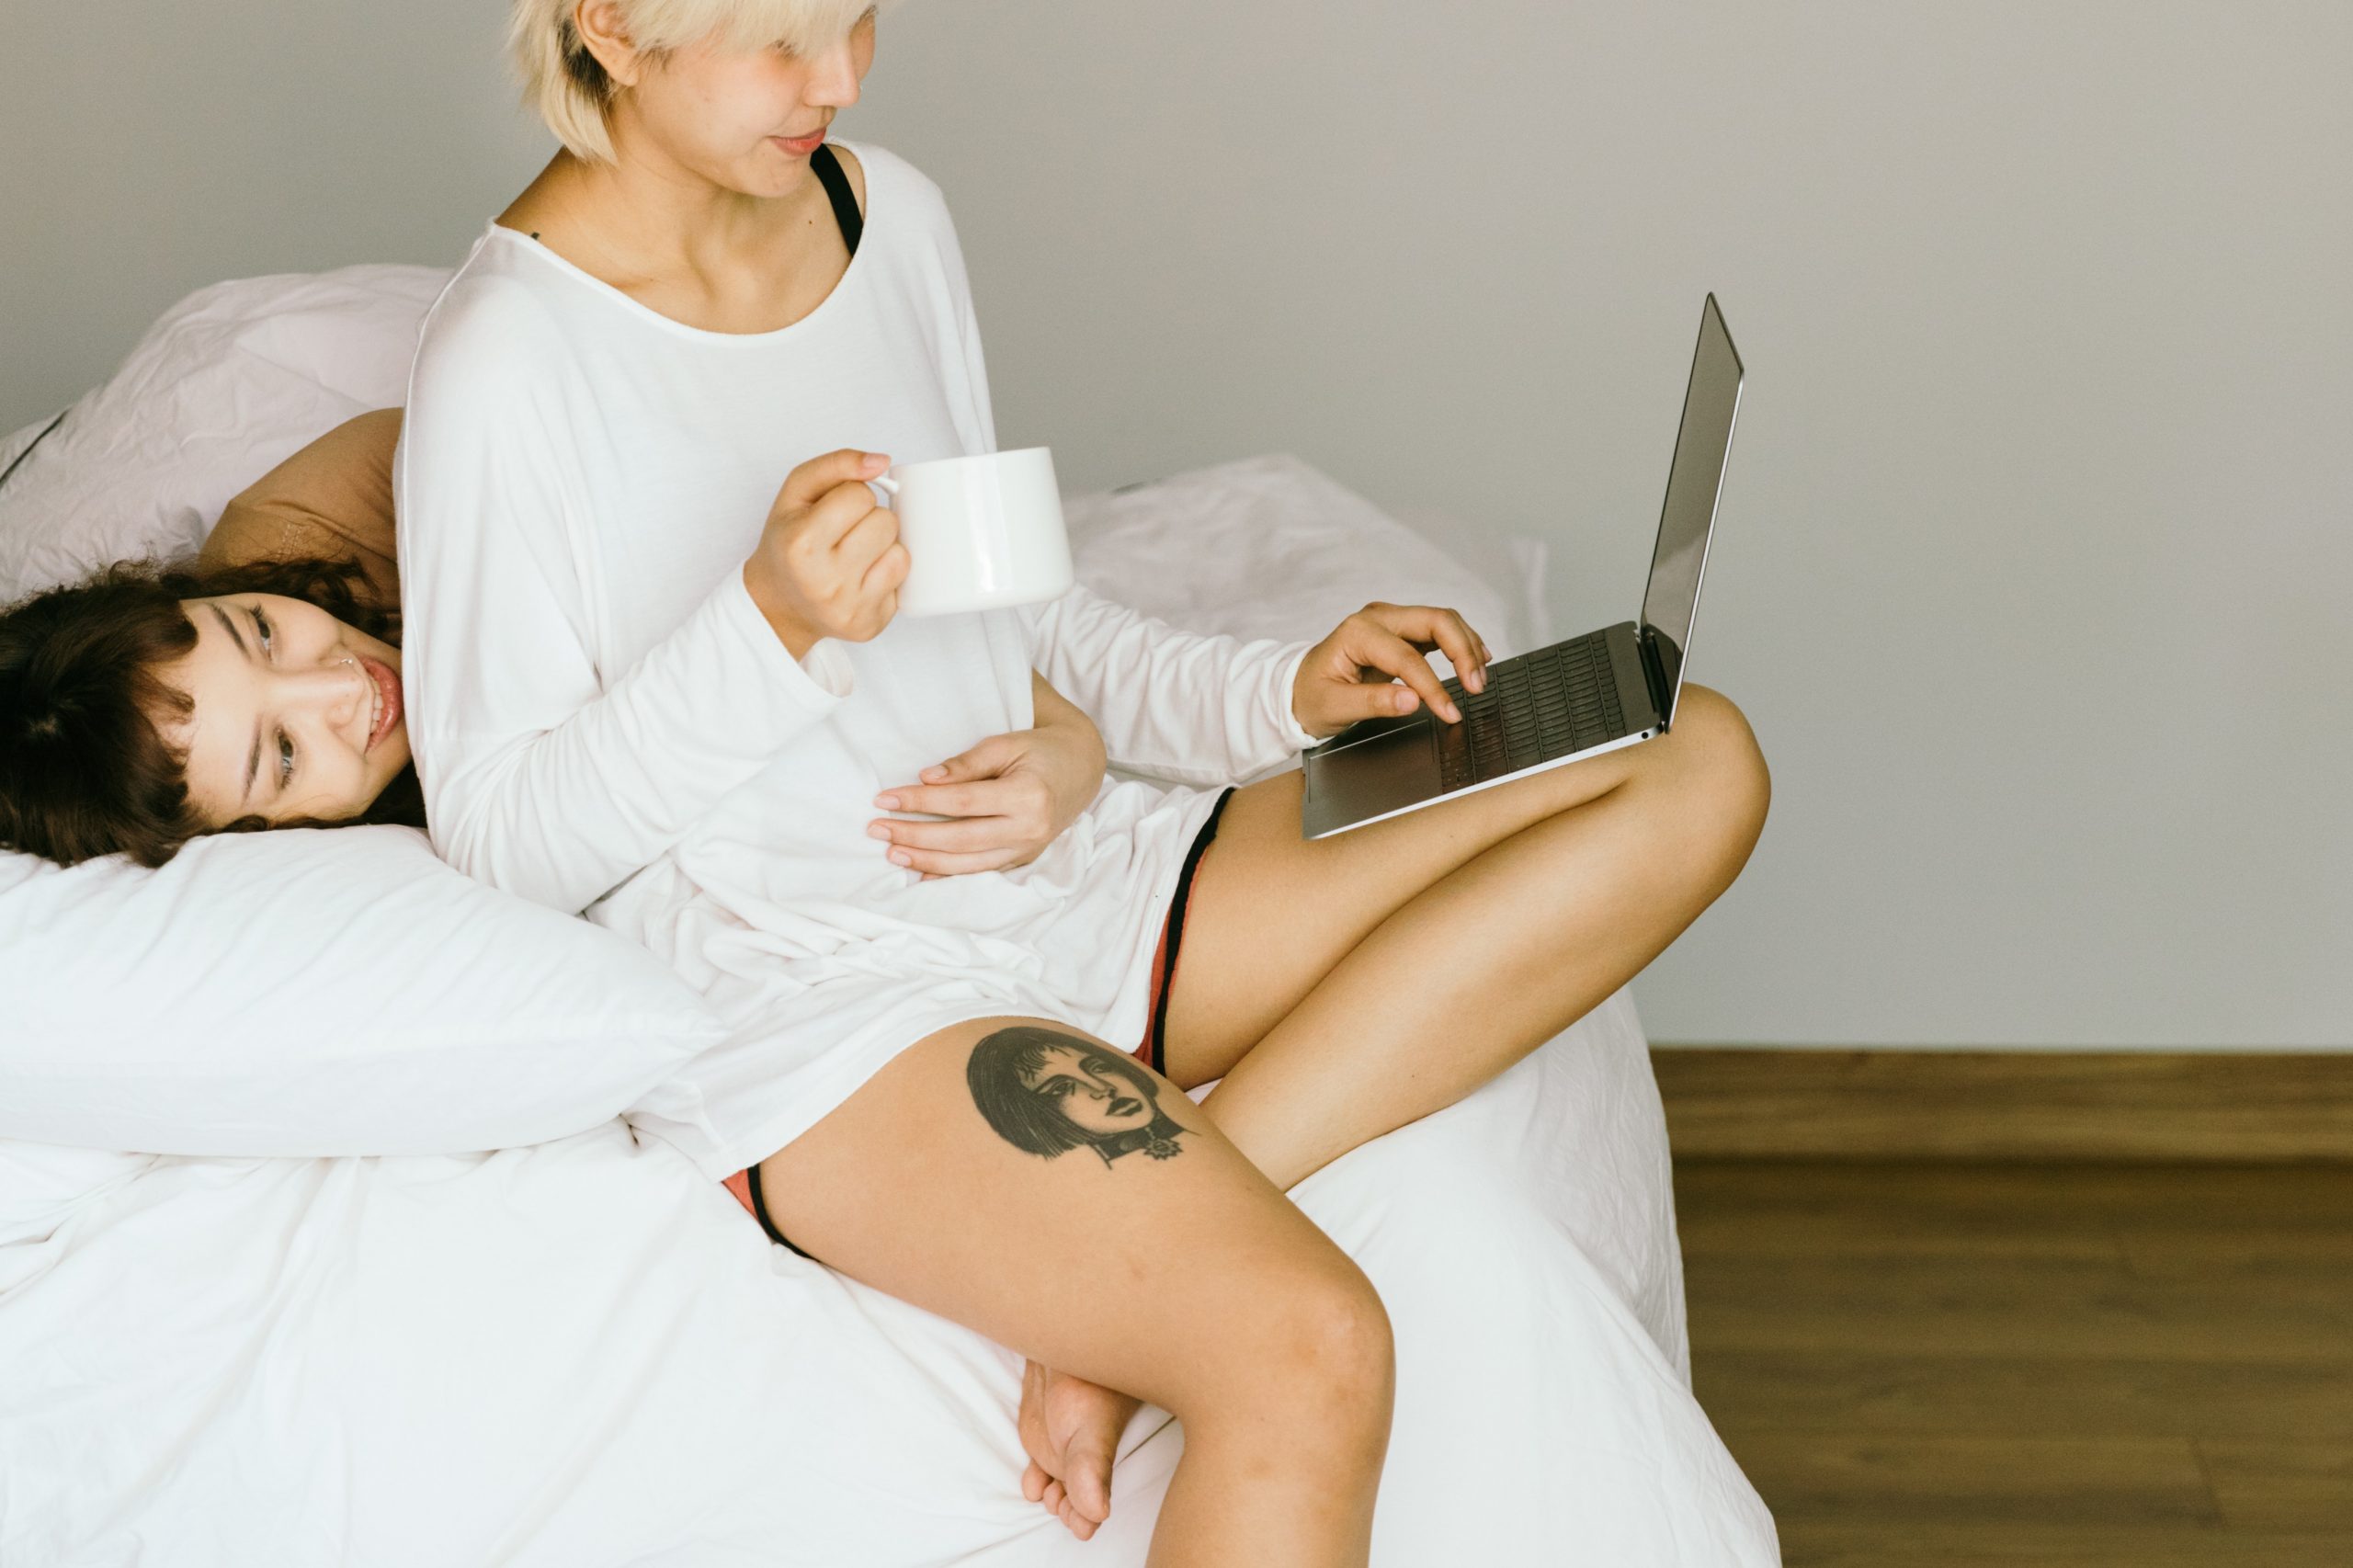 a woman wraps her arm around another woman in bed while she looks at her laptop